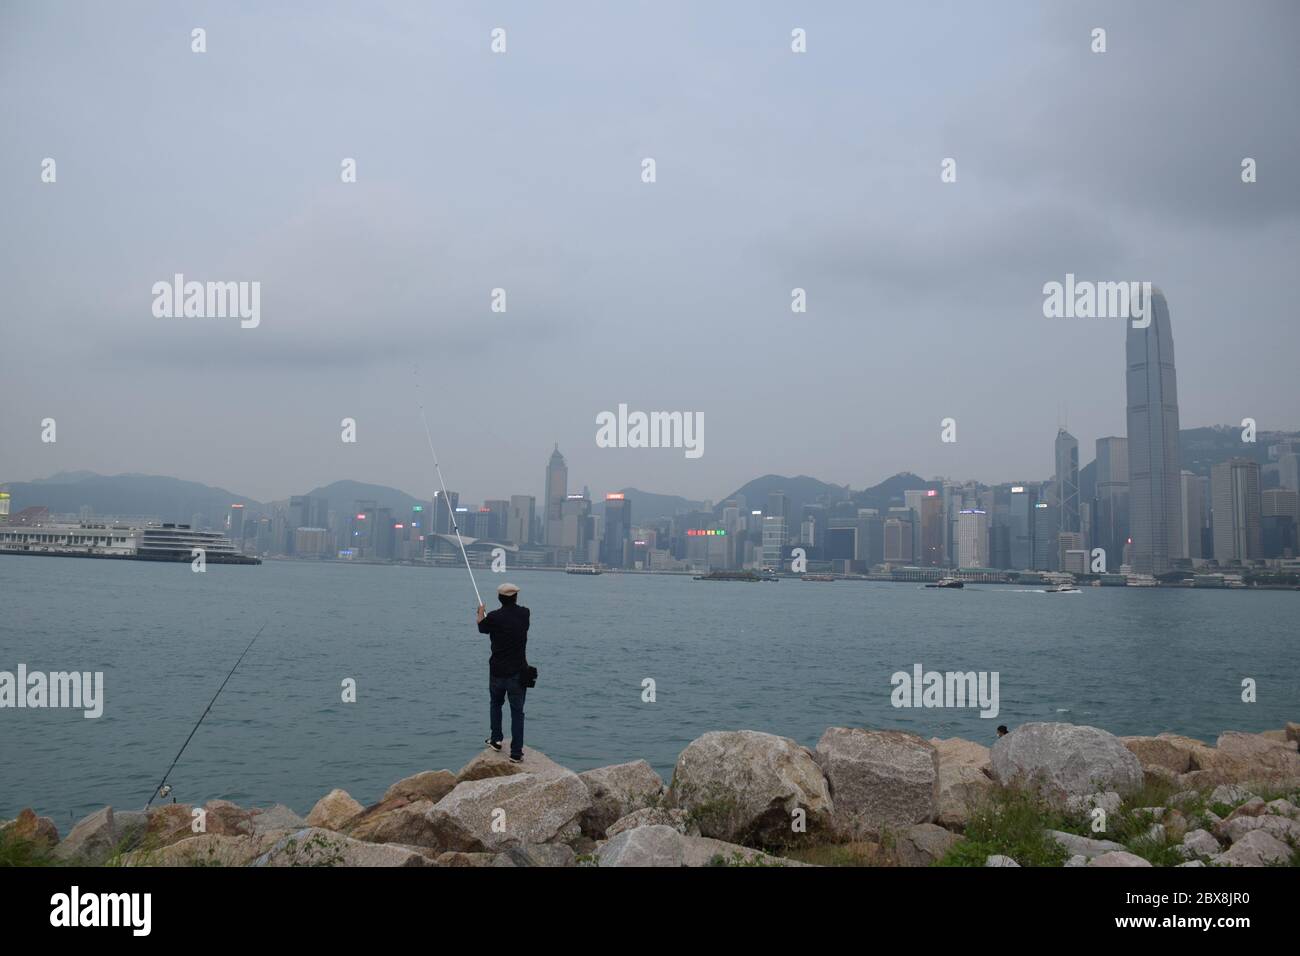 Local man fishing in West Kowloon park in front of Victoria harbour in Hong Kong island - Hong Kong Stock Photo